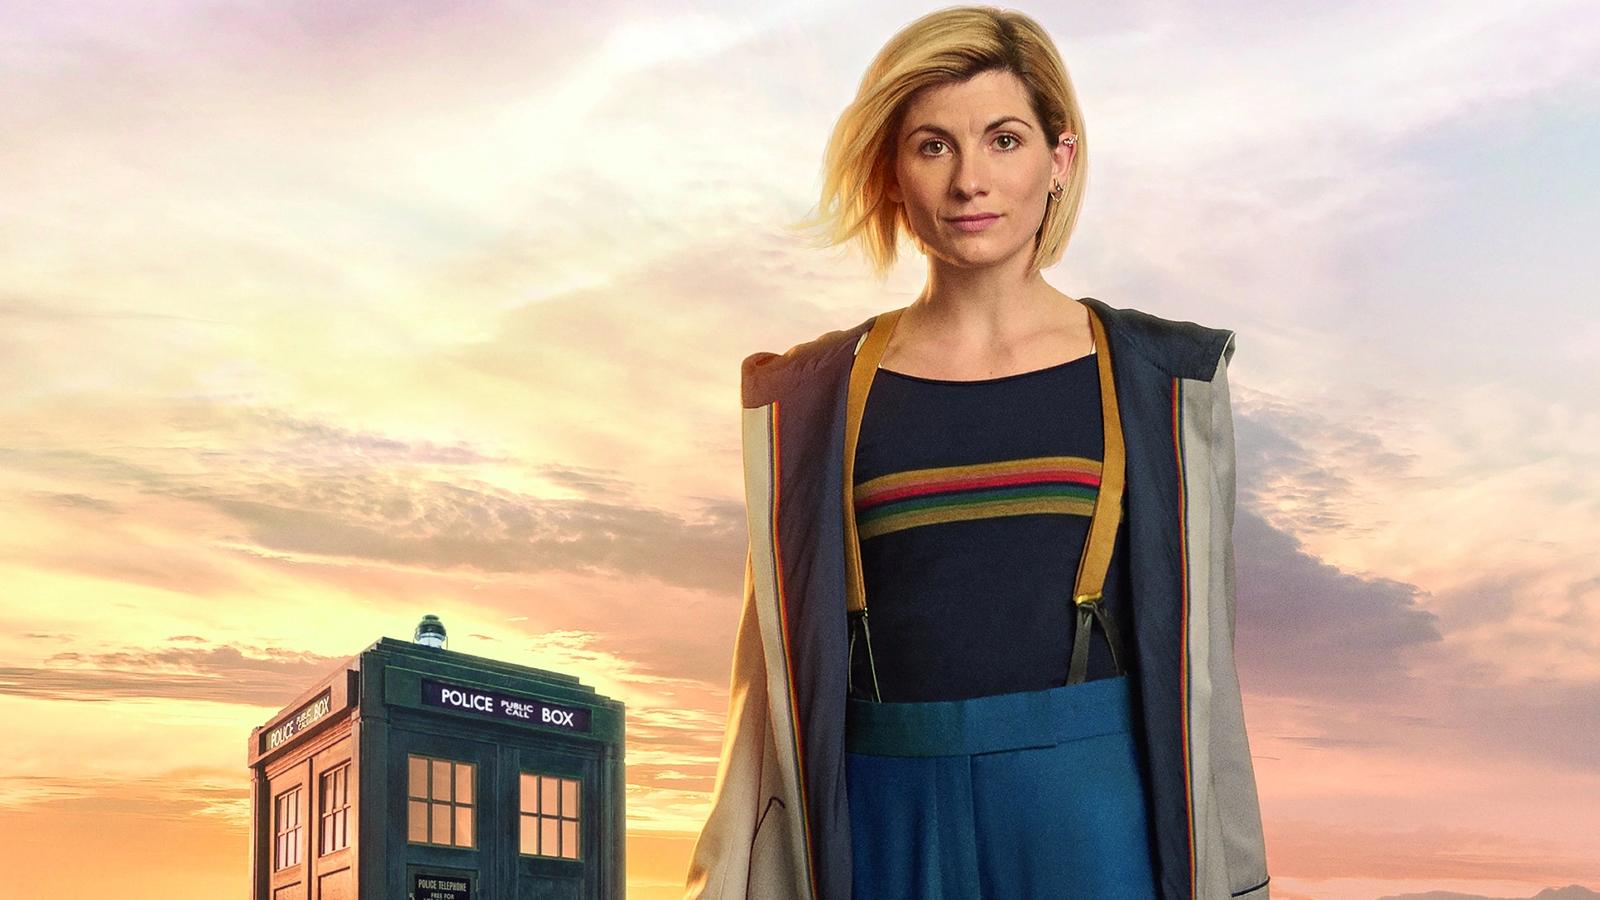 Jodie Whittaker as the Thirteenth Doctor standing in front of the TARDIS in a Doctor Who promotional still.